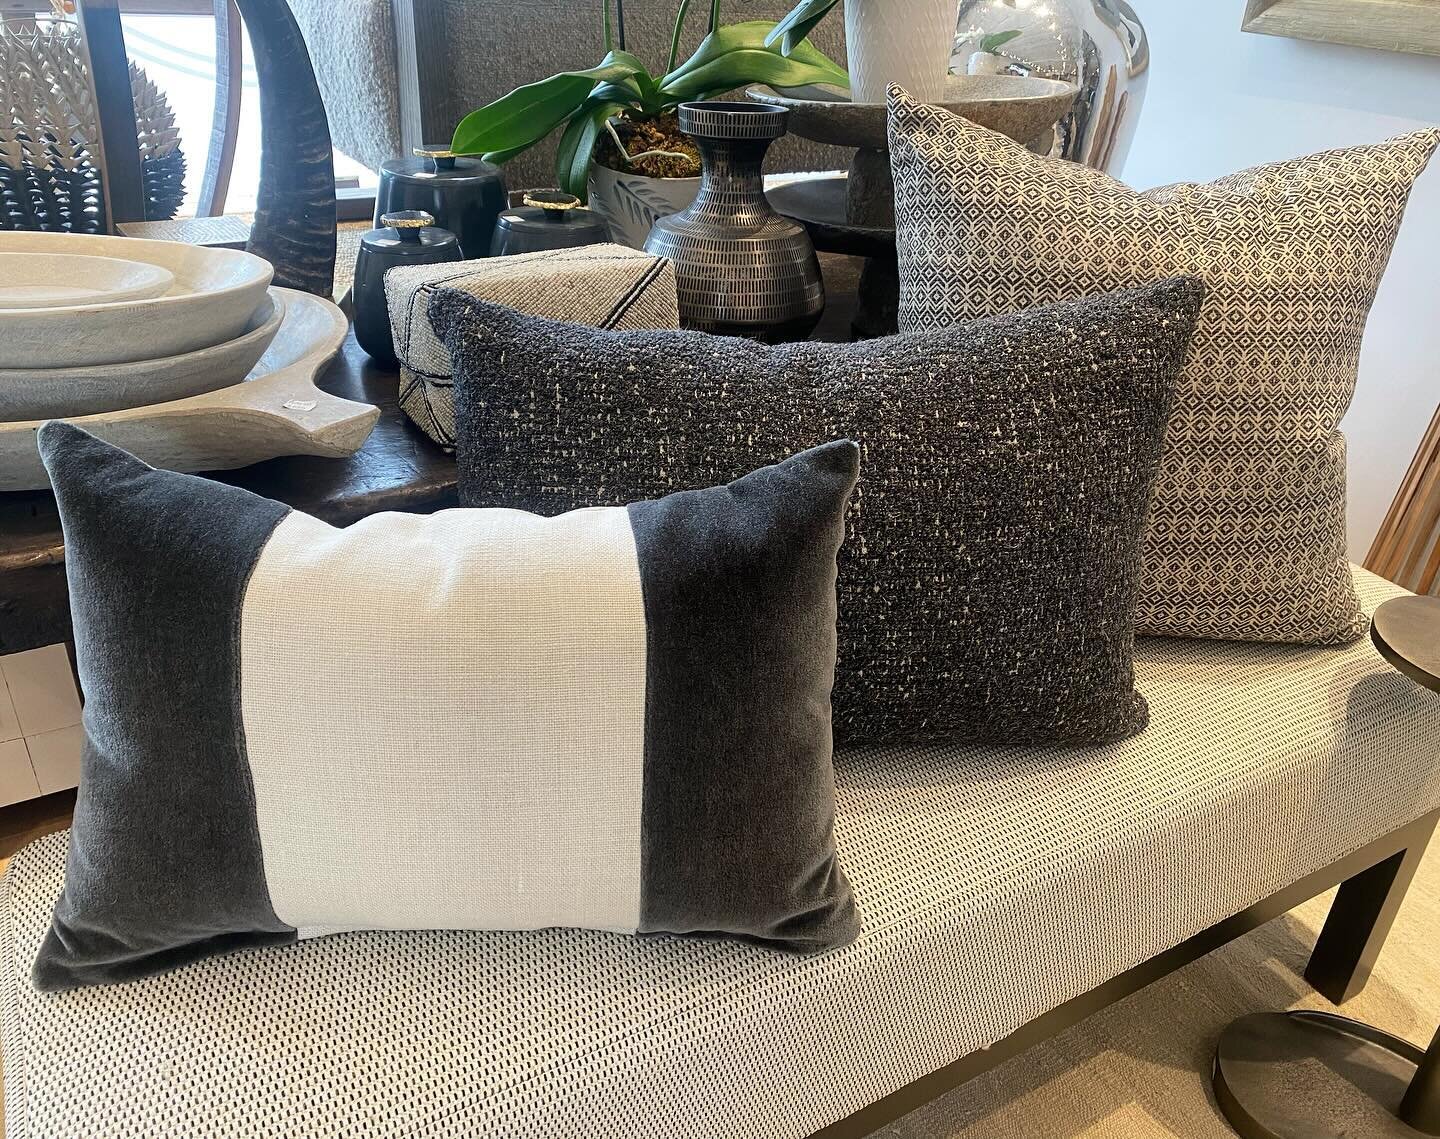 ✨ Custom Pillows ✨

Custom pillows can make all the difference when pulling a room together. 
.
.
.
#custom #custompillows #interiordecor #interiordesign #interiorphilosophy #interiorphilosophyatl #atlantadesigners